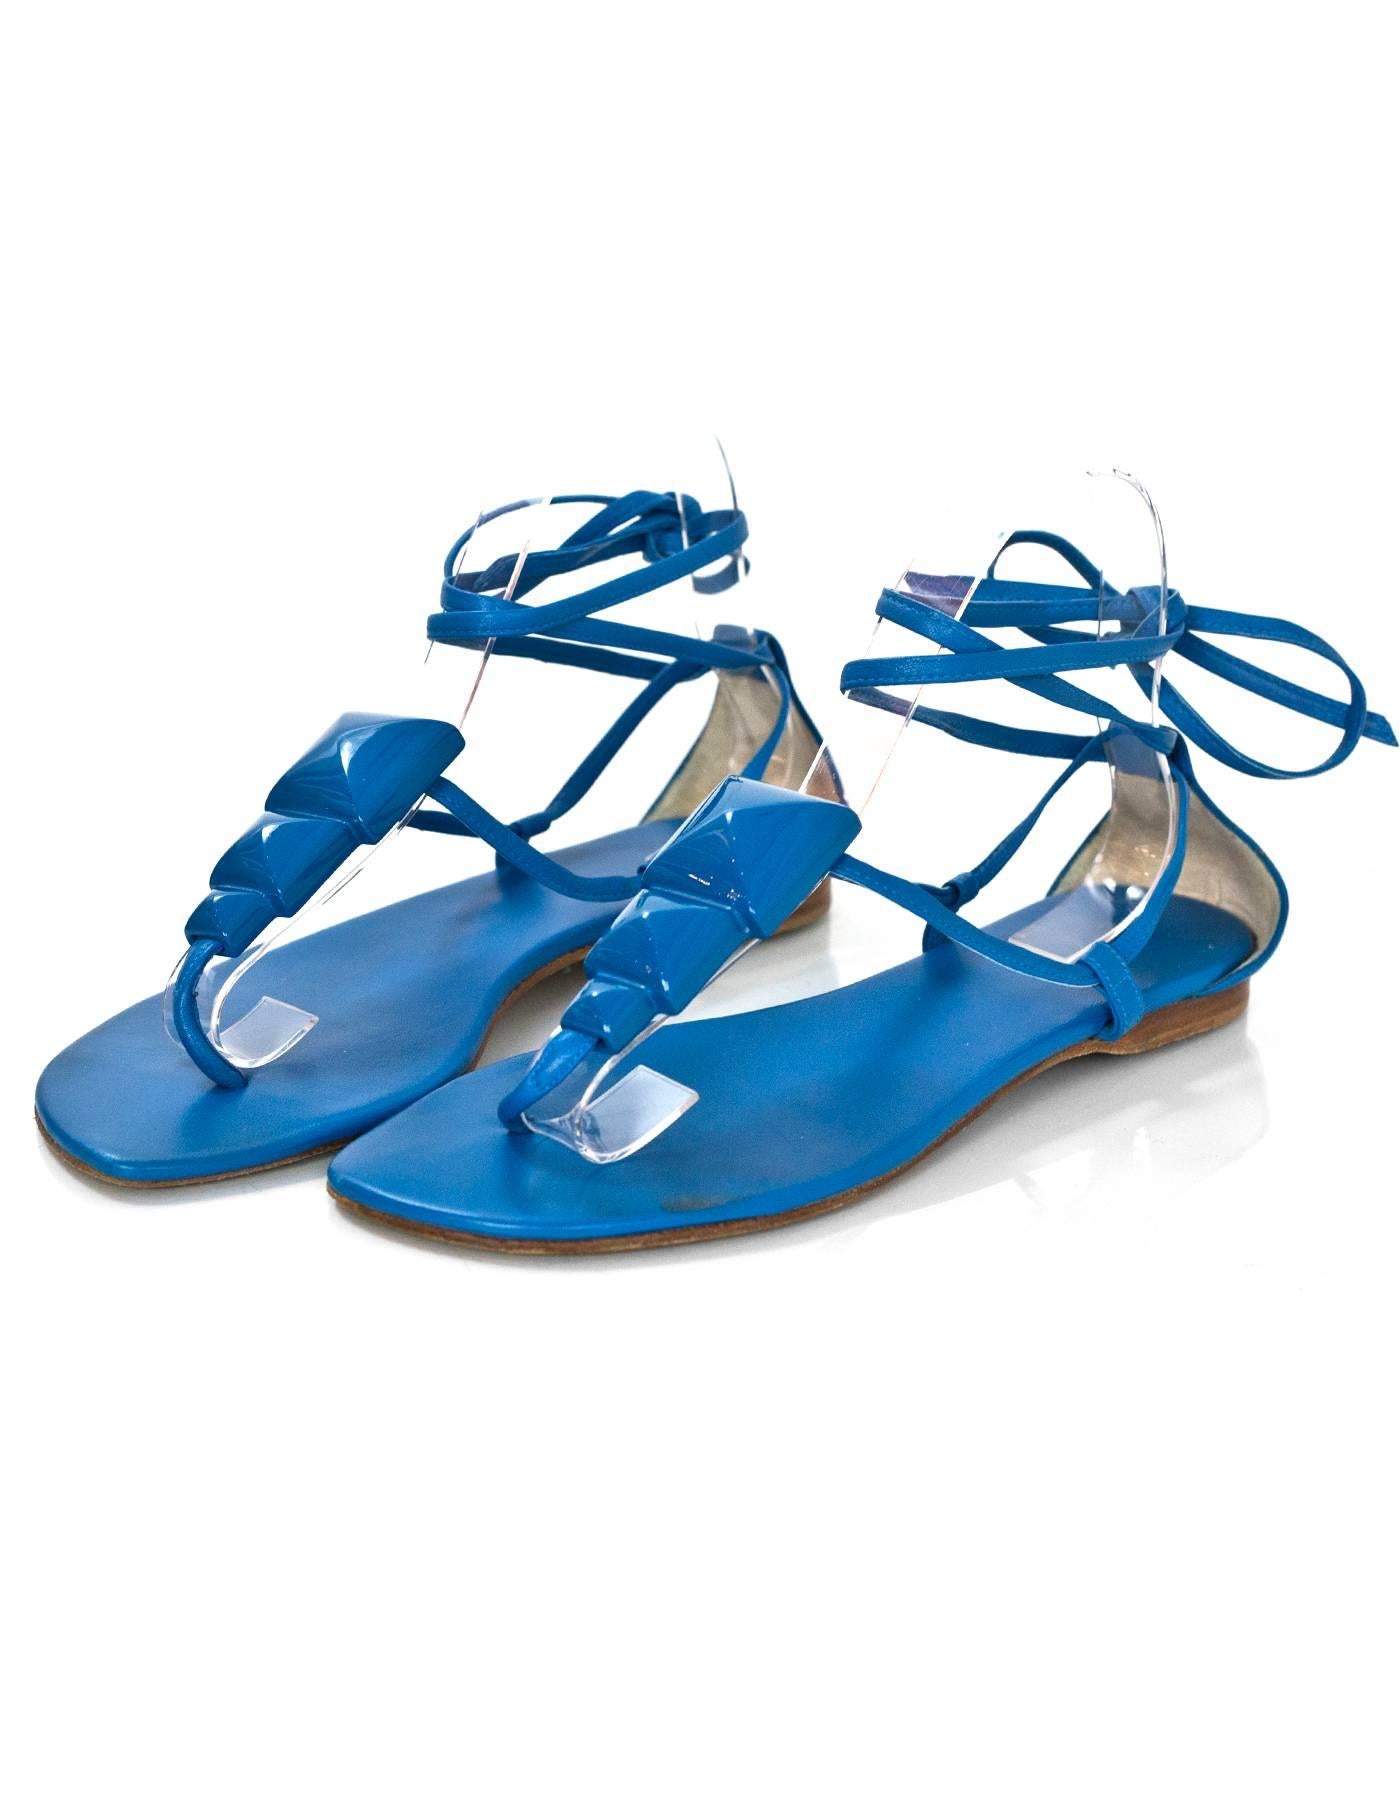 Hermes Blue Leather Wrap Sandals Sz 38

Features resin decoration at vamp

Made In: Spain
Color: Blue
Materials: Leather, resin
Closure/Opening: Leather lace tie closure
Sole Stamp: Hermes 38 Semelle Cuir Made in Spain
Overall Condition: Excellent